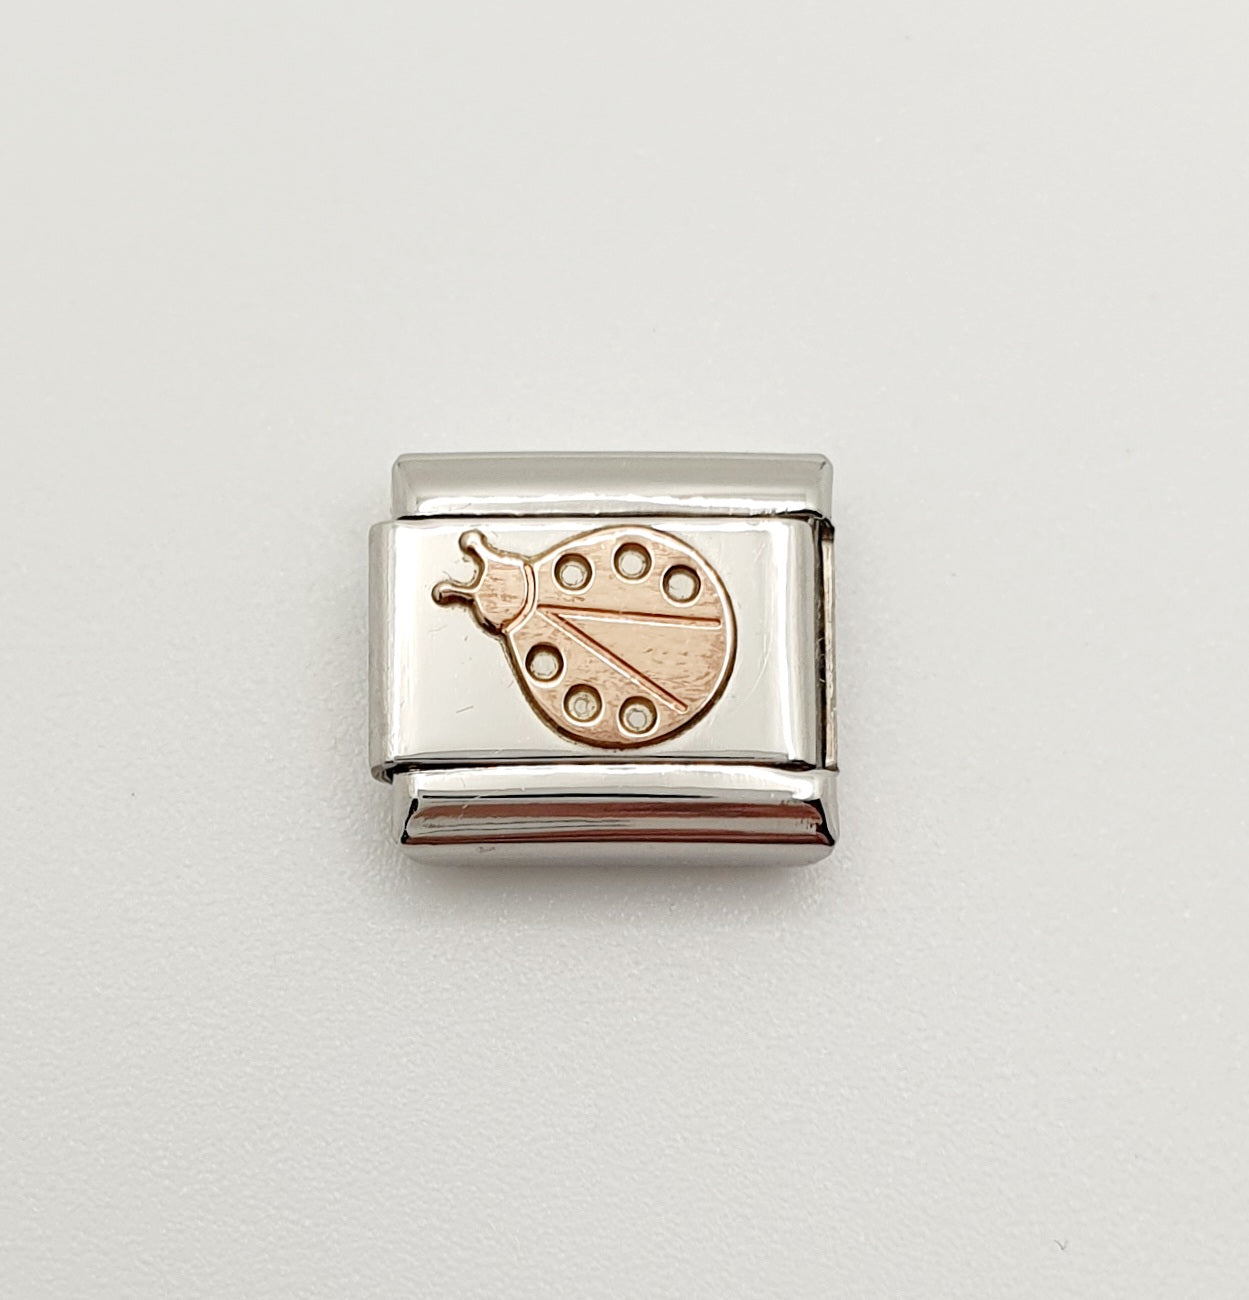 Nomination Charm Link "Ladybug" Stainless Steel with 9k Rose Gold, 430104 07